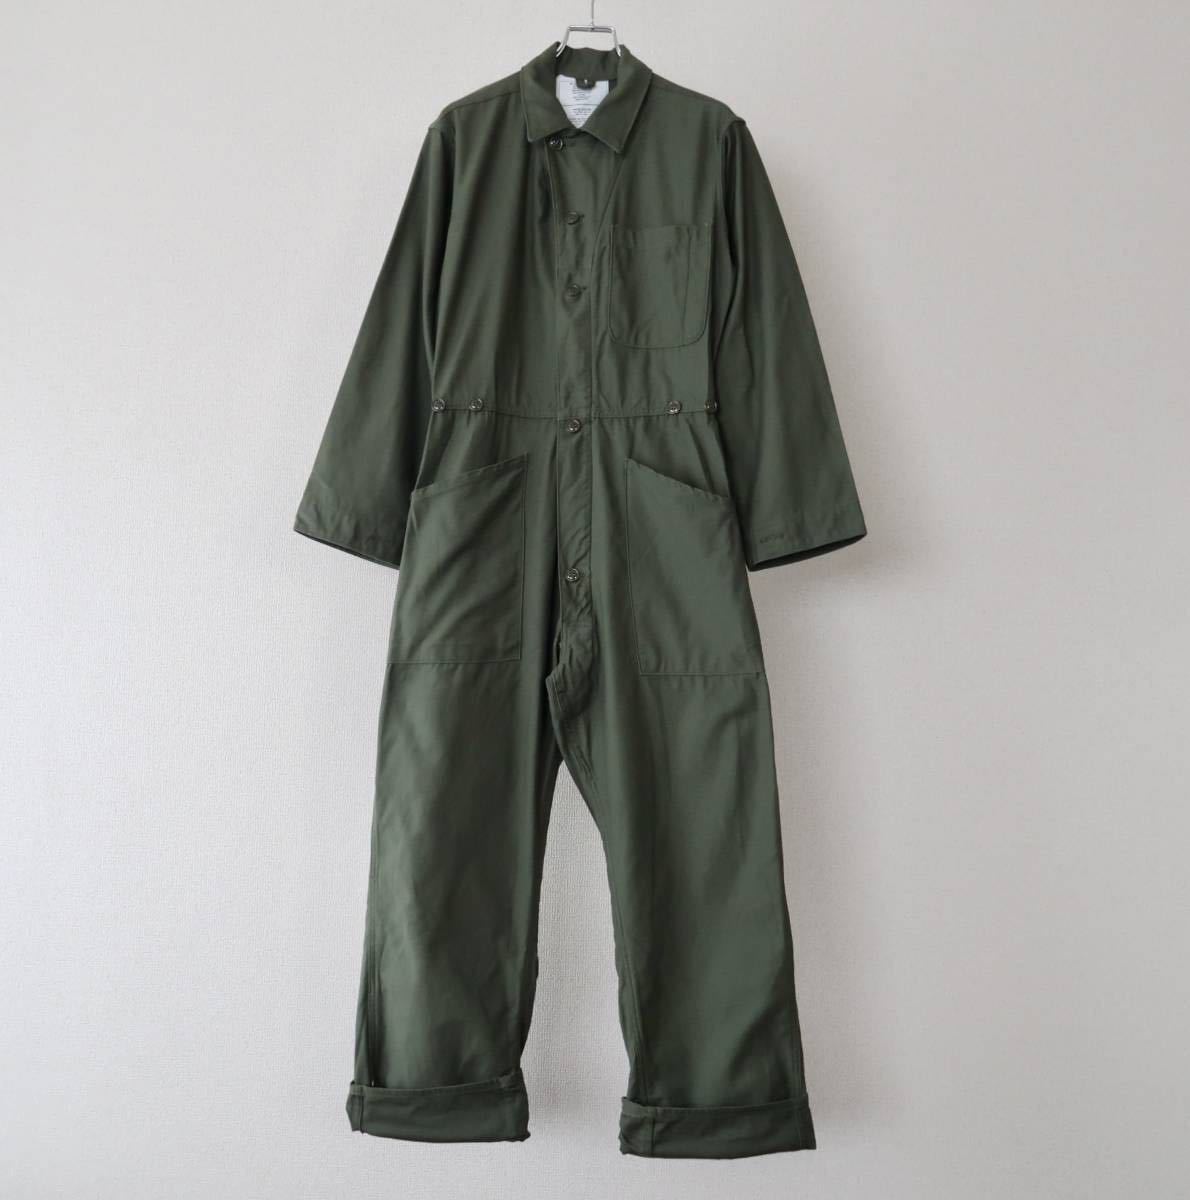  almost use impression none 1983\'s U.S. ARMY COVERALLS, MENS, TYPE I cotton satin all-in-one inscription SMALL/ Vintage the US armed forces coveralls Baker pants 